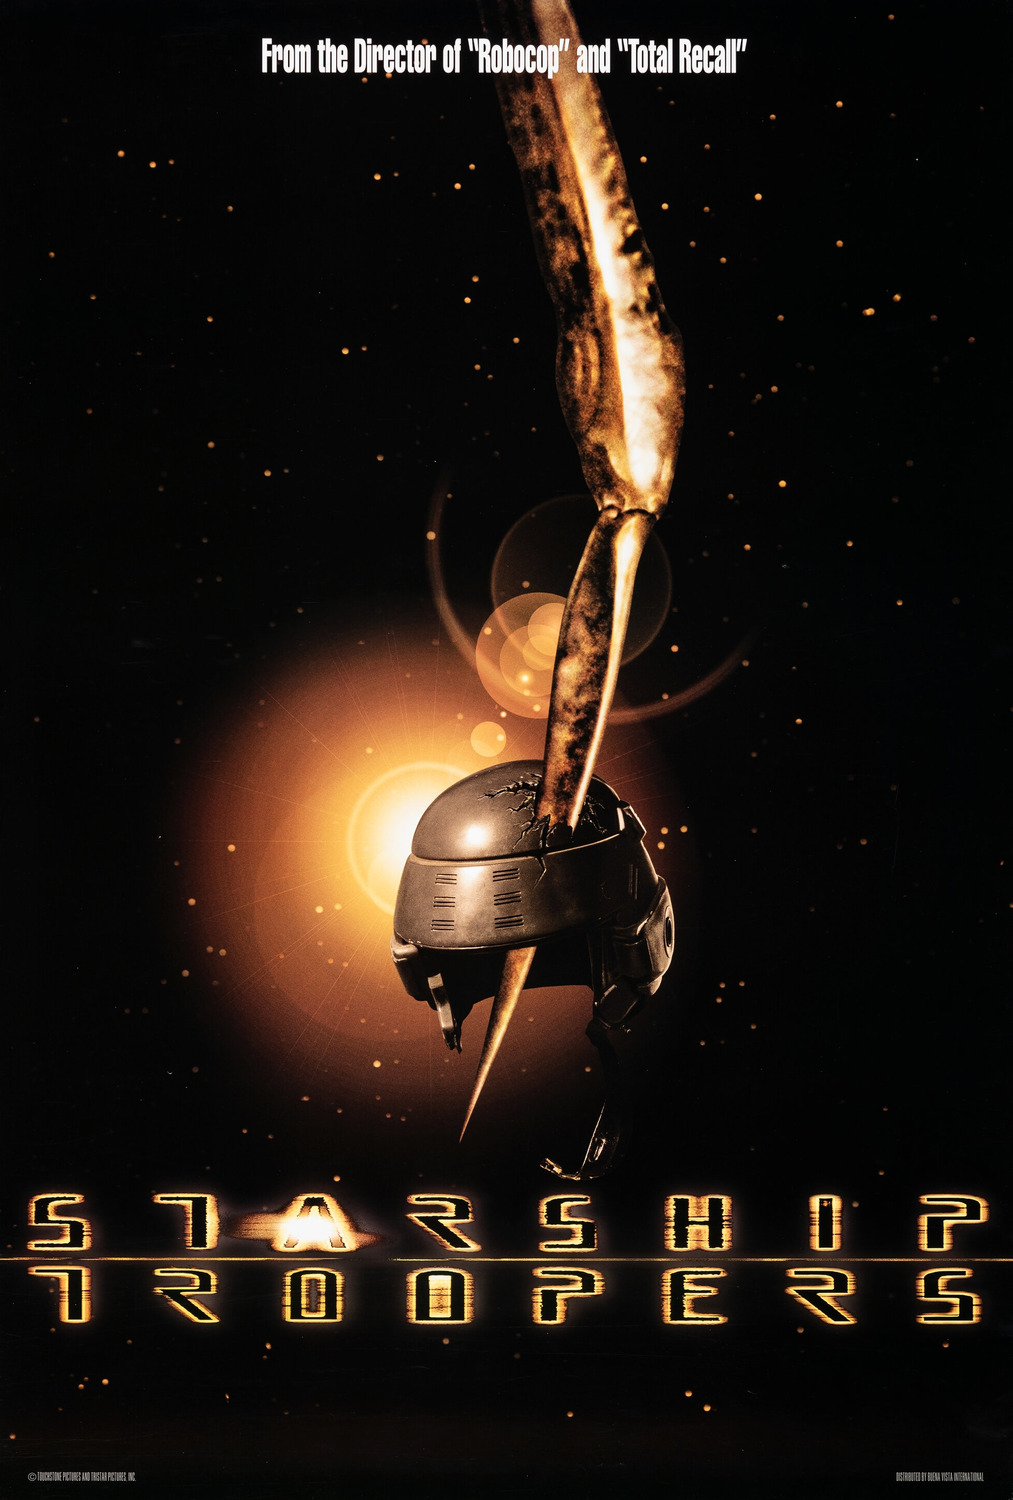 Extra Large Movie Poster Image for Starship Troopers (#1 of 6)